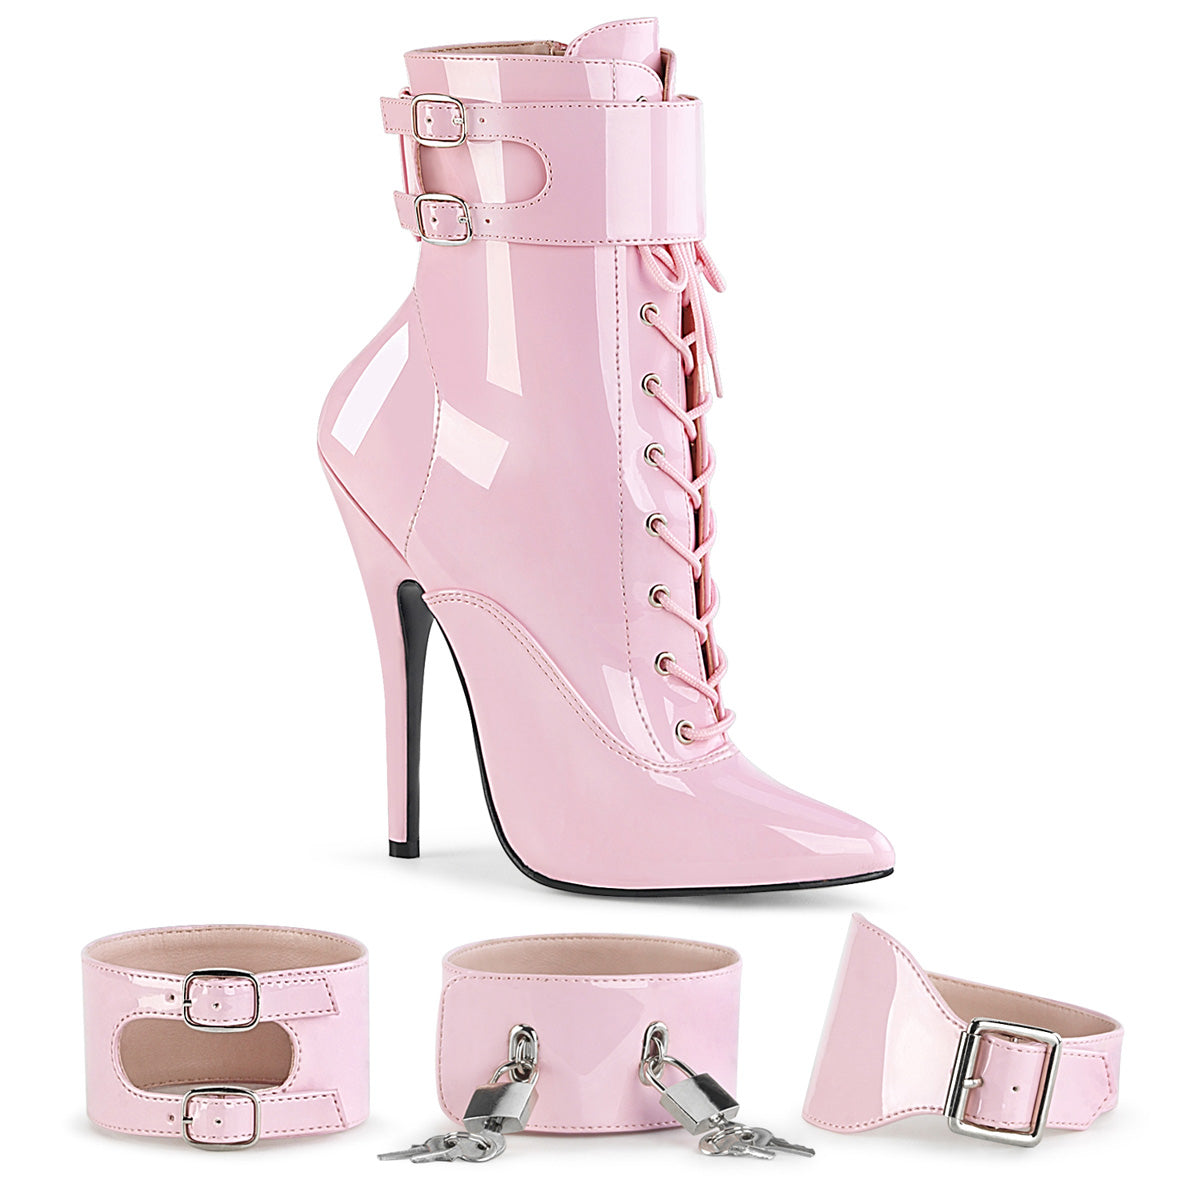 Devious Womens Ankle Boots DOMINA-1023 B. Pink Pat